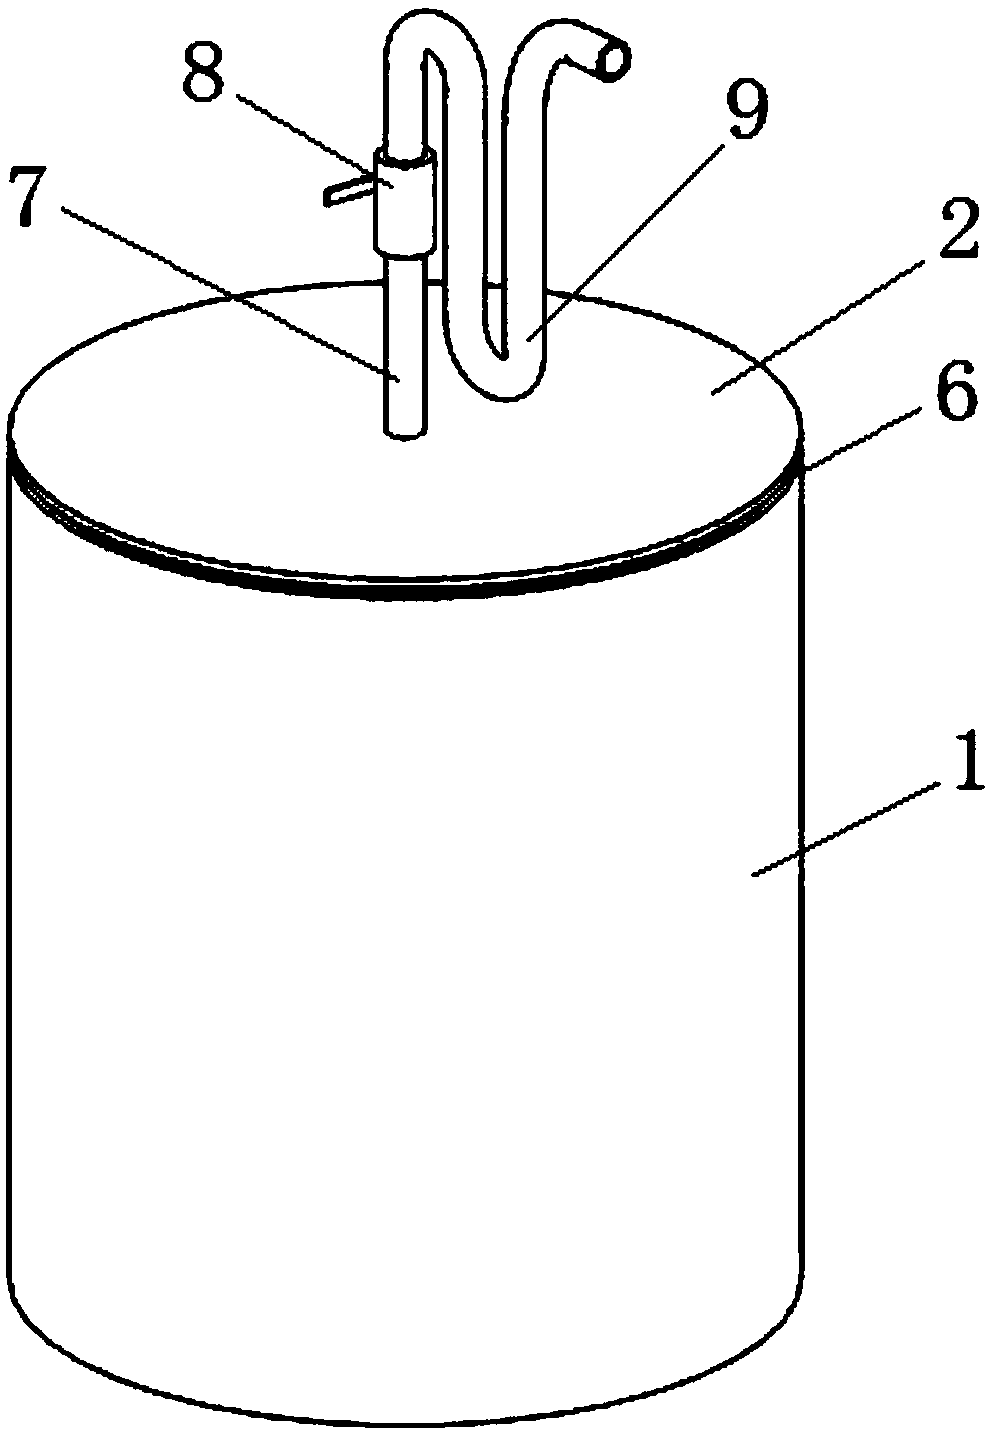 Fermentation device for brewing